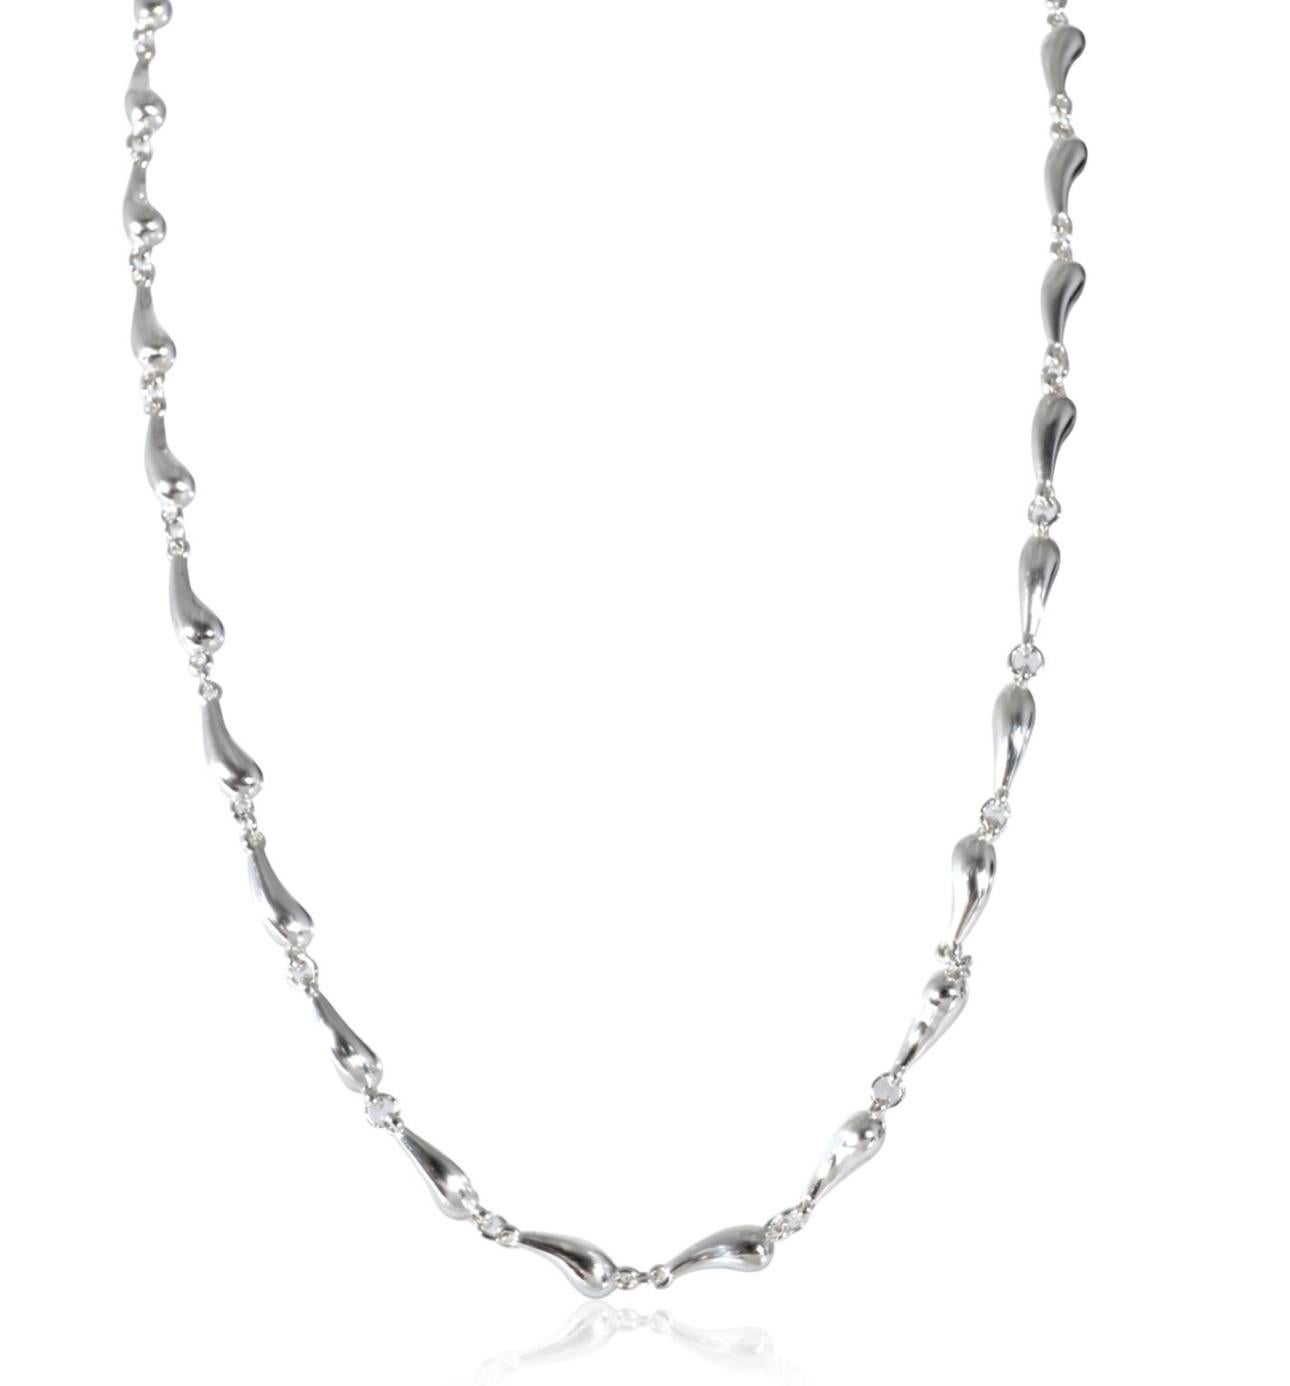 tiffany chain link necklace